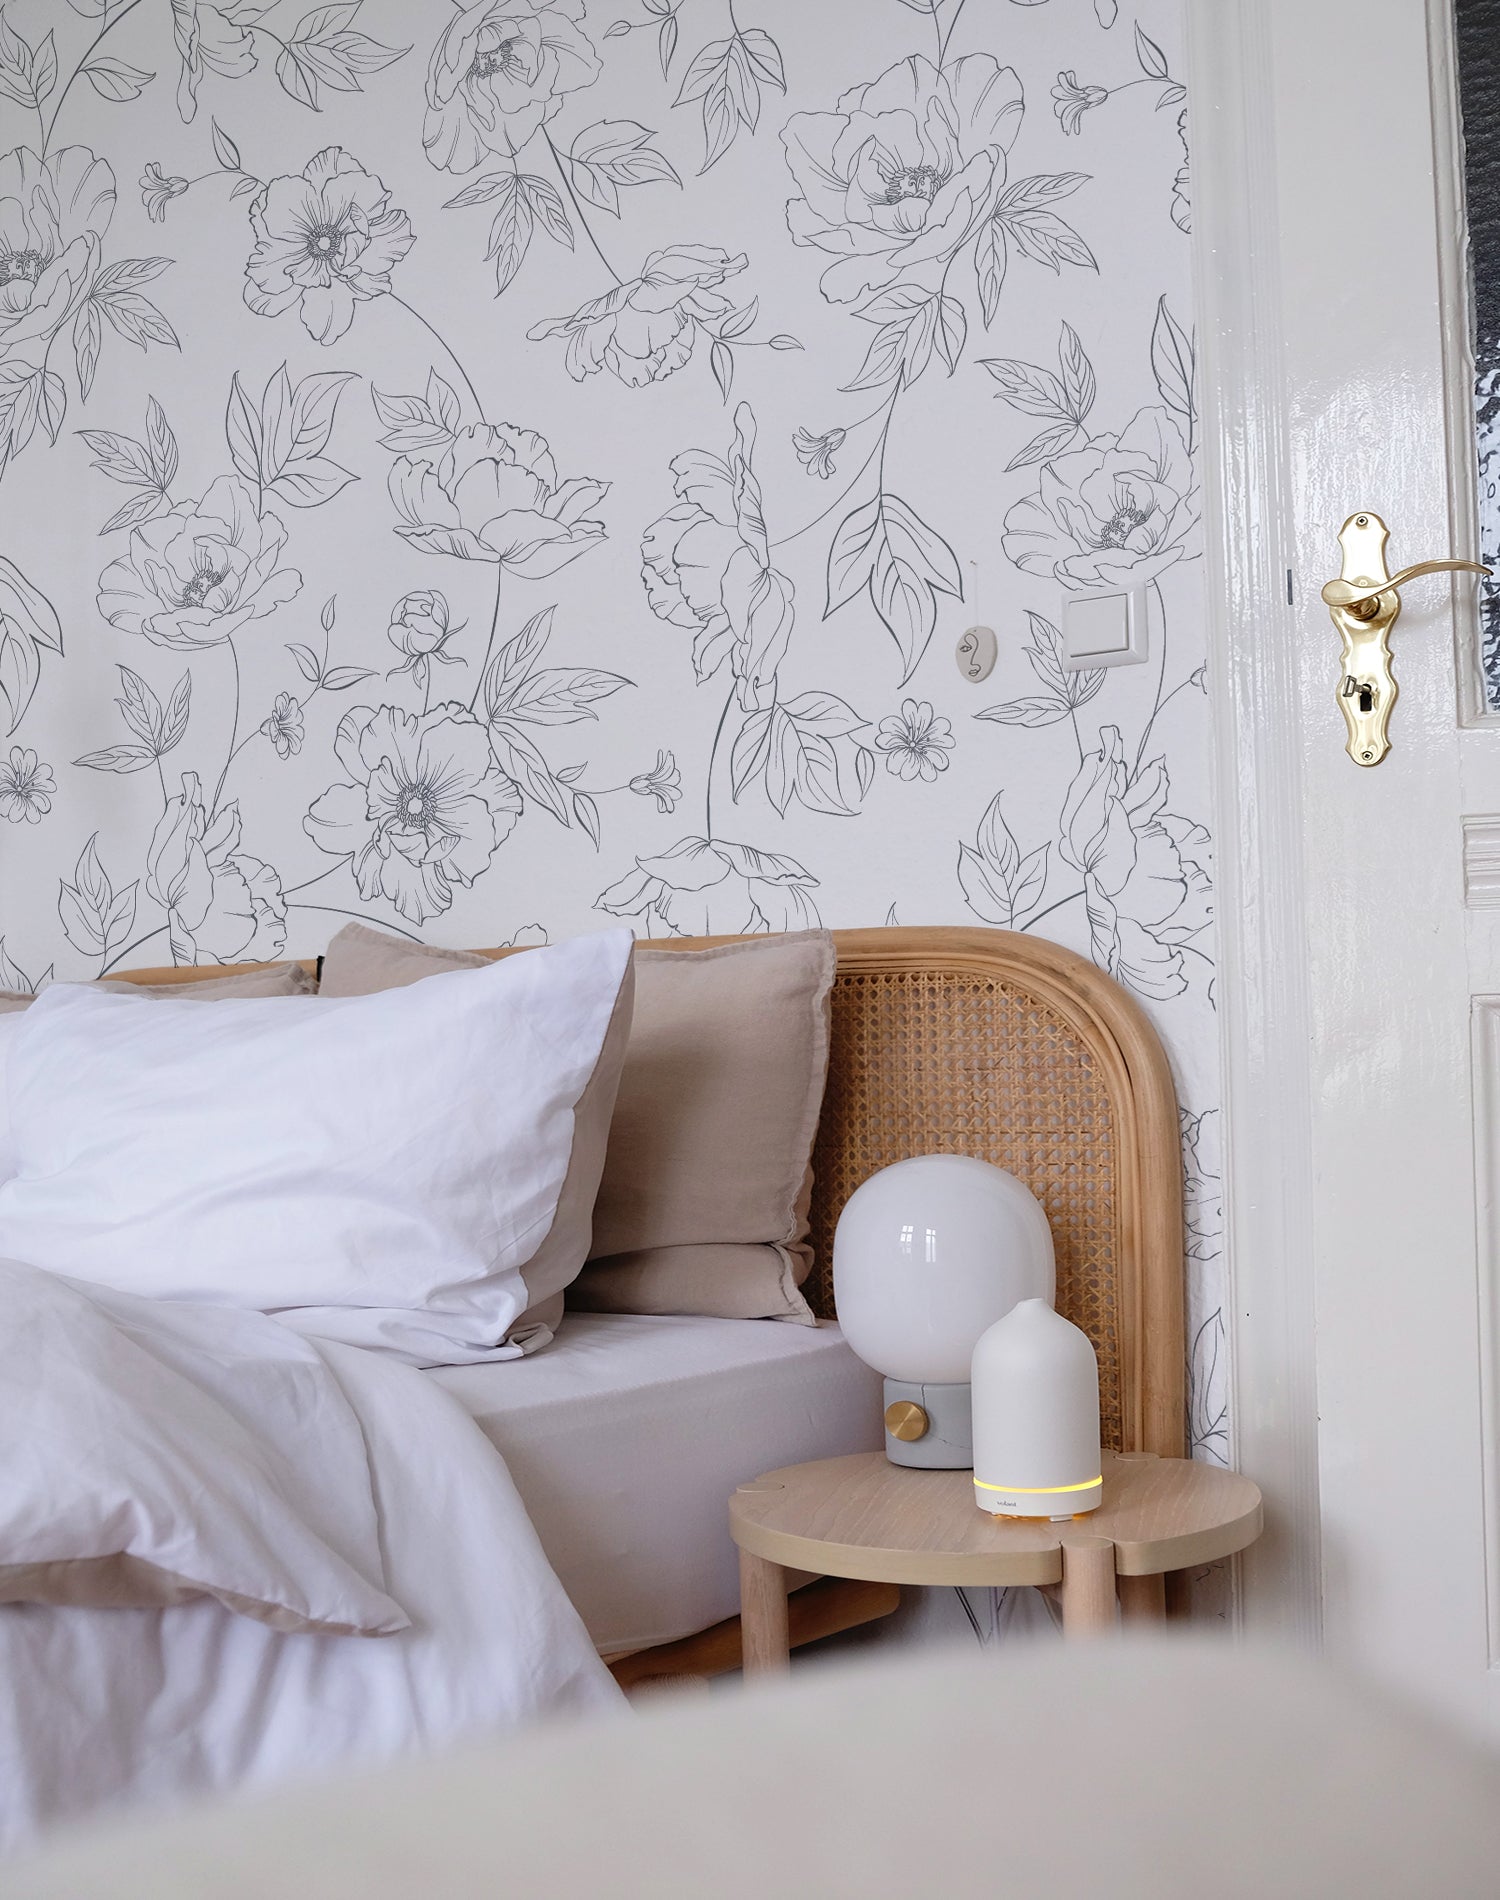 A stylish bedroom featuring a rattan headboard, white bedding, and a round wooden nightstand with a modern lamp. The wall behind the bed is covered with white wallpaper displaying a dainty black floral pattern, adding a touch of sophistication.